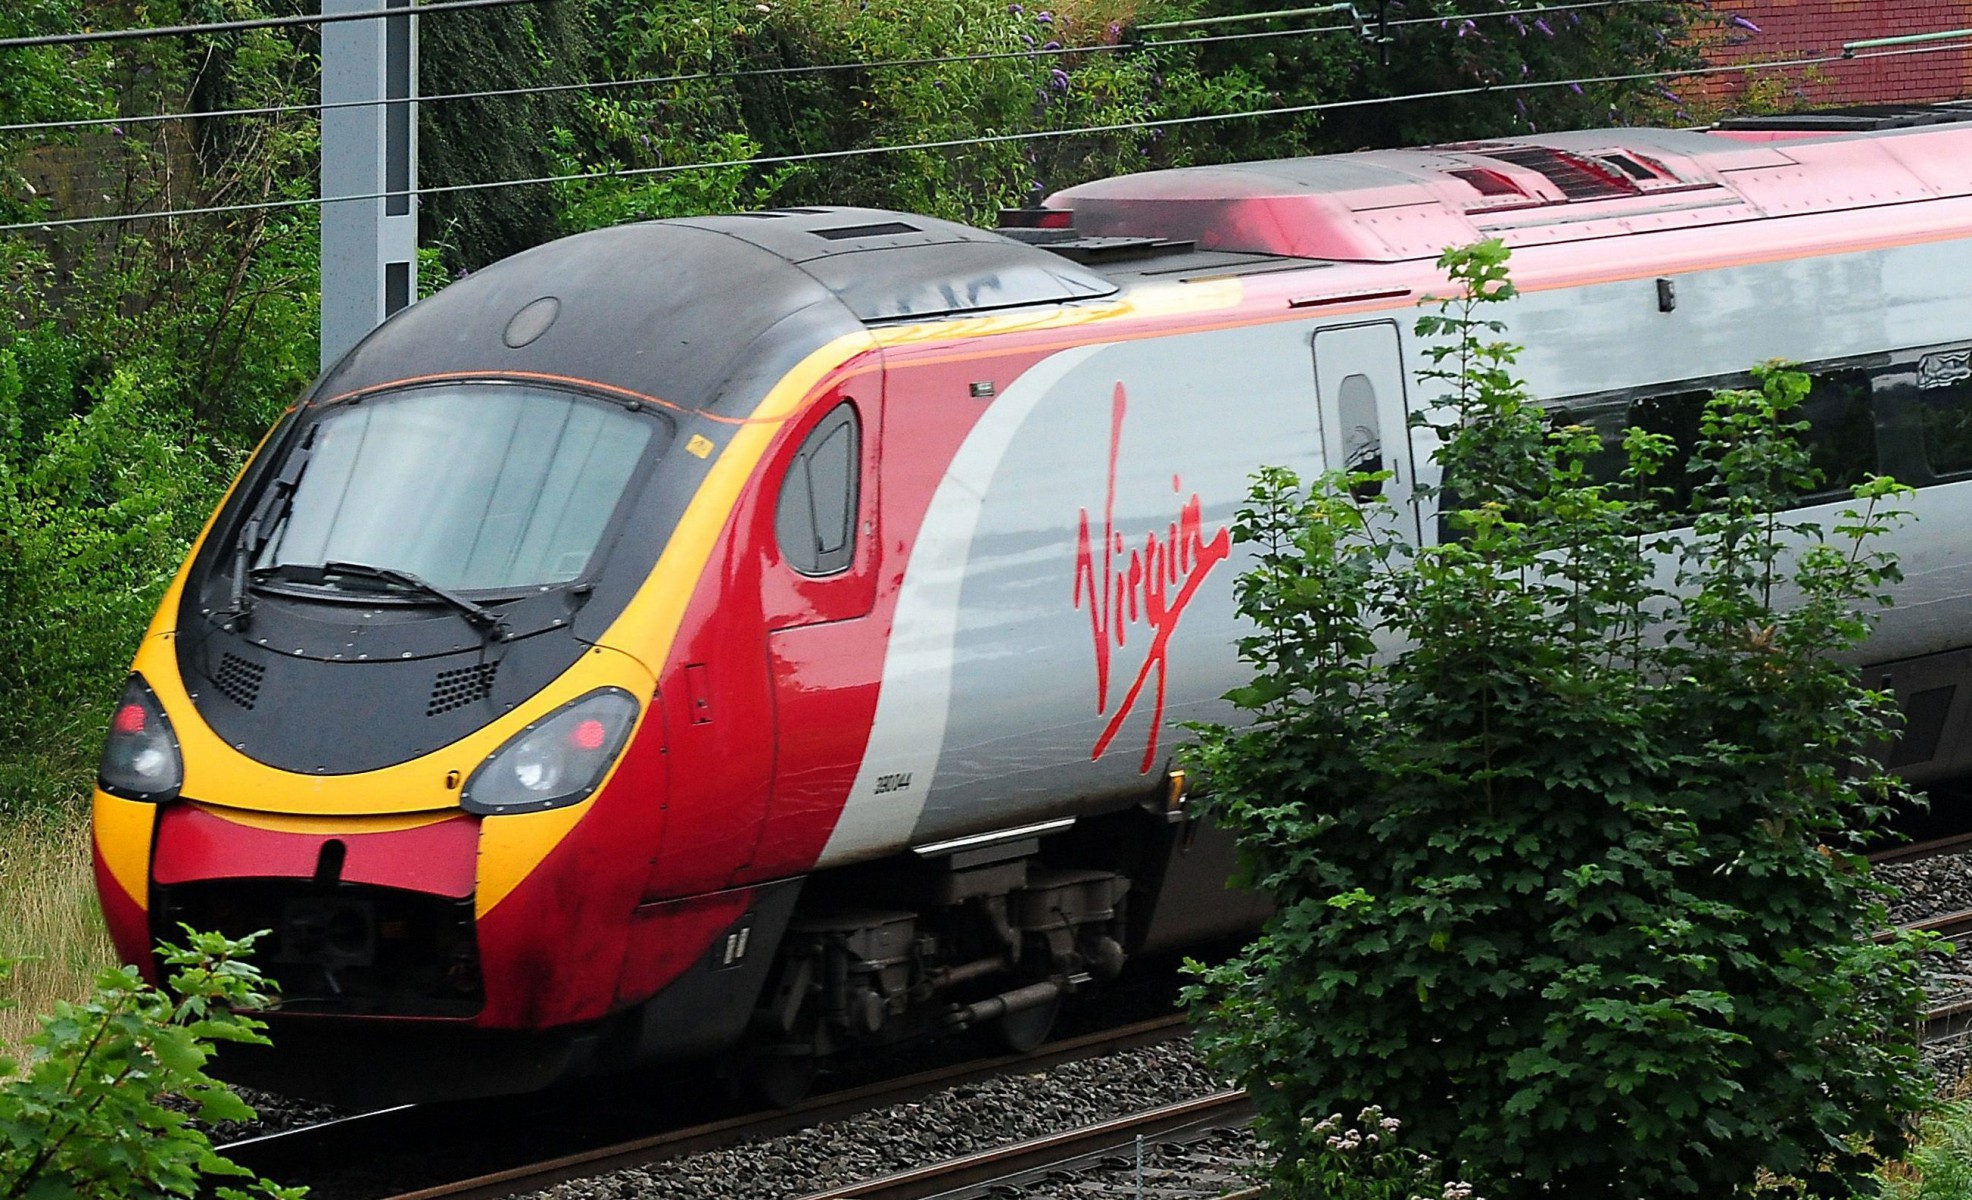 Passengers on the Virgin train were asked to give up their seats and move to first class